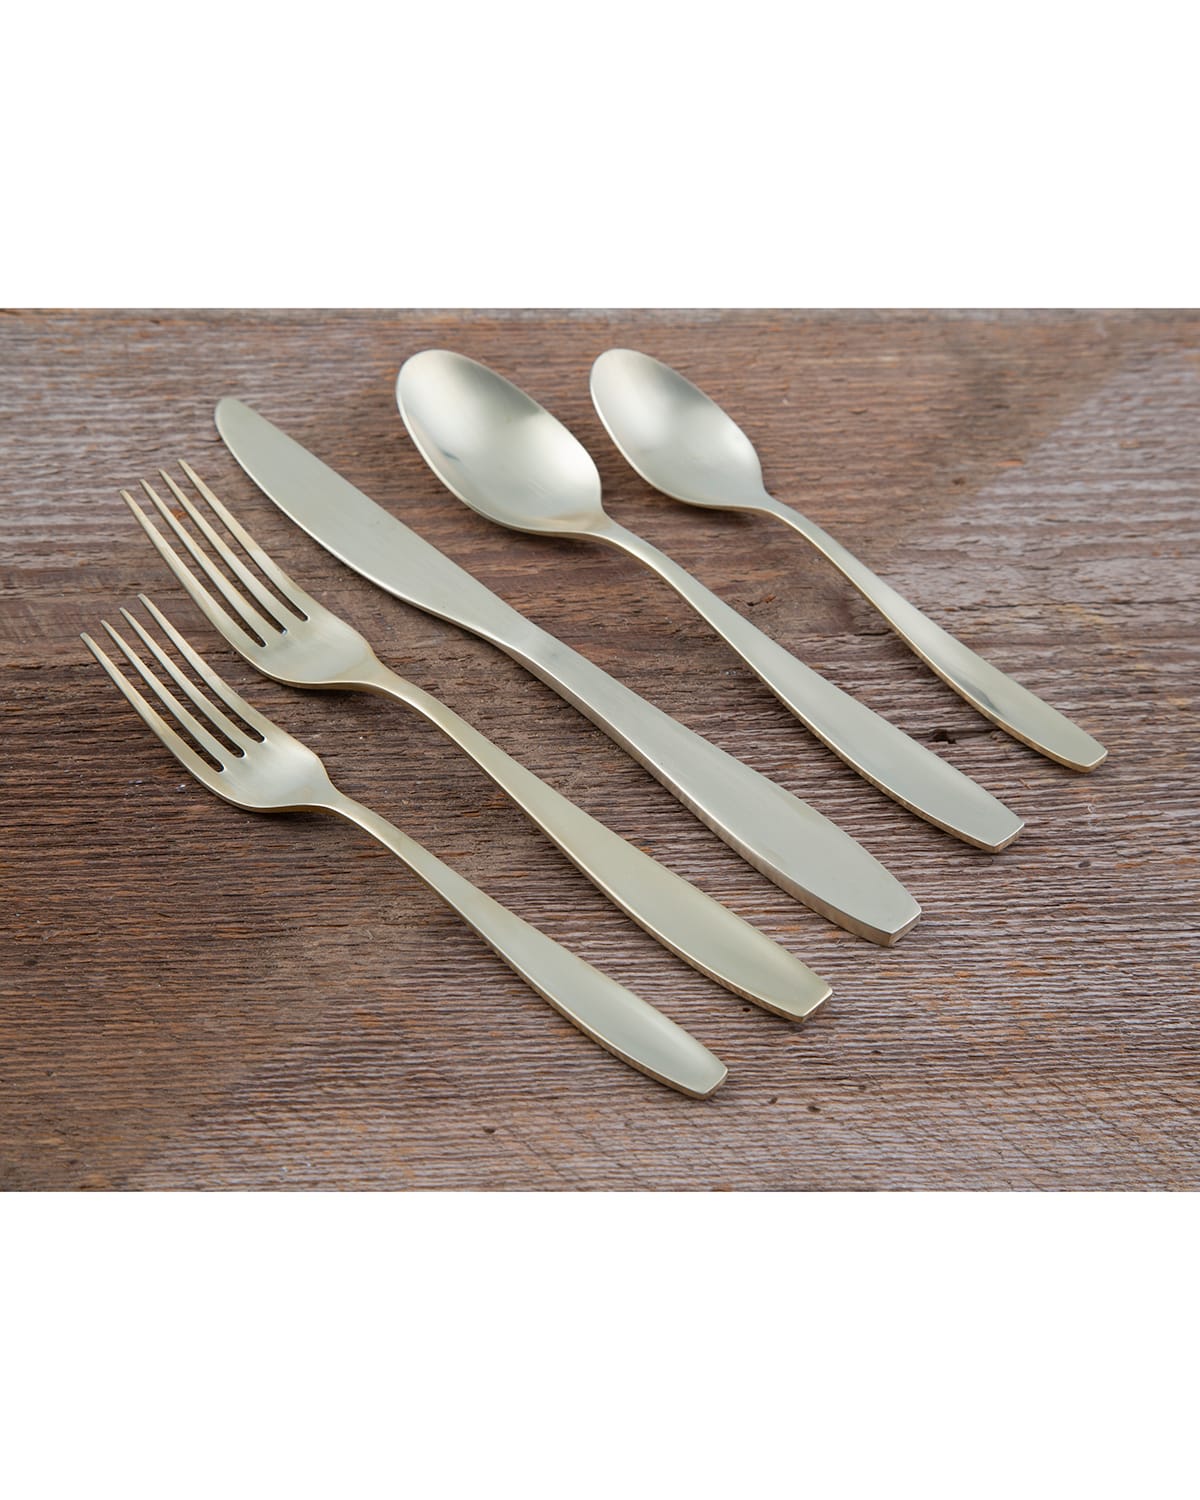 January Champagne Satin 20-Piece Flatware Set, Service for 4